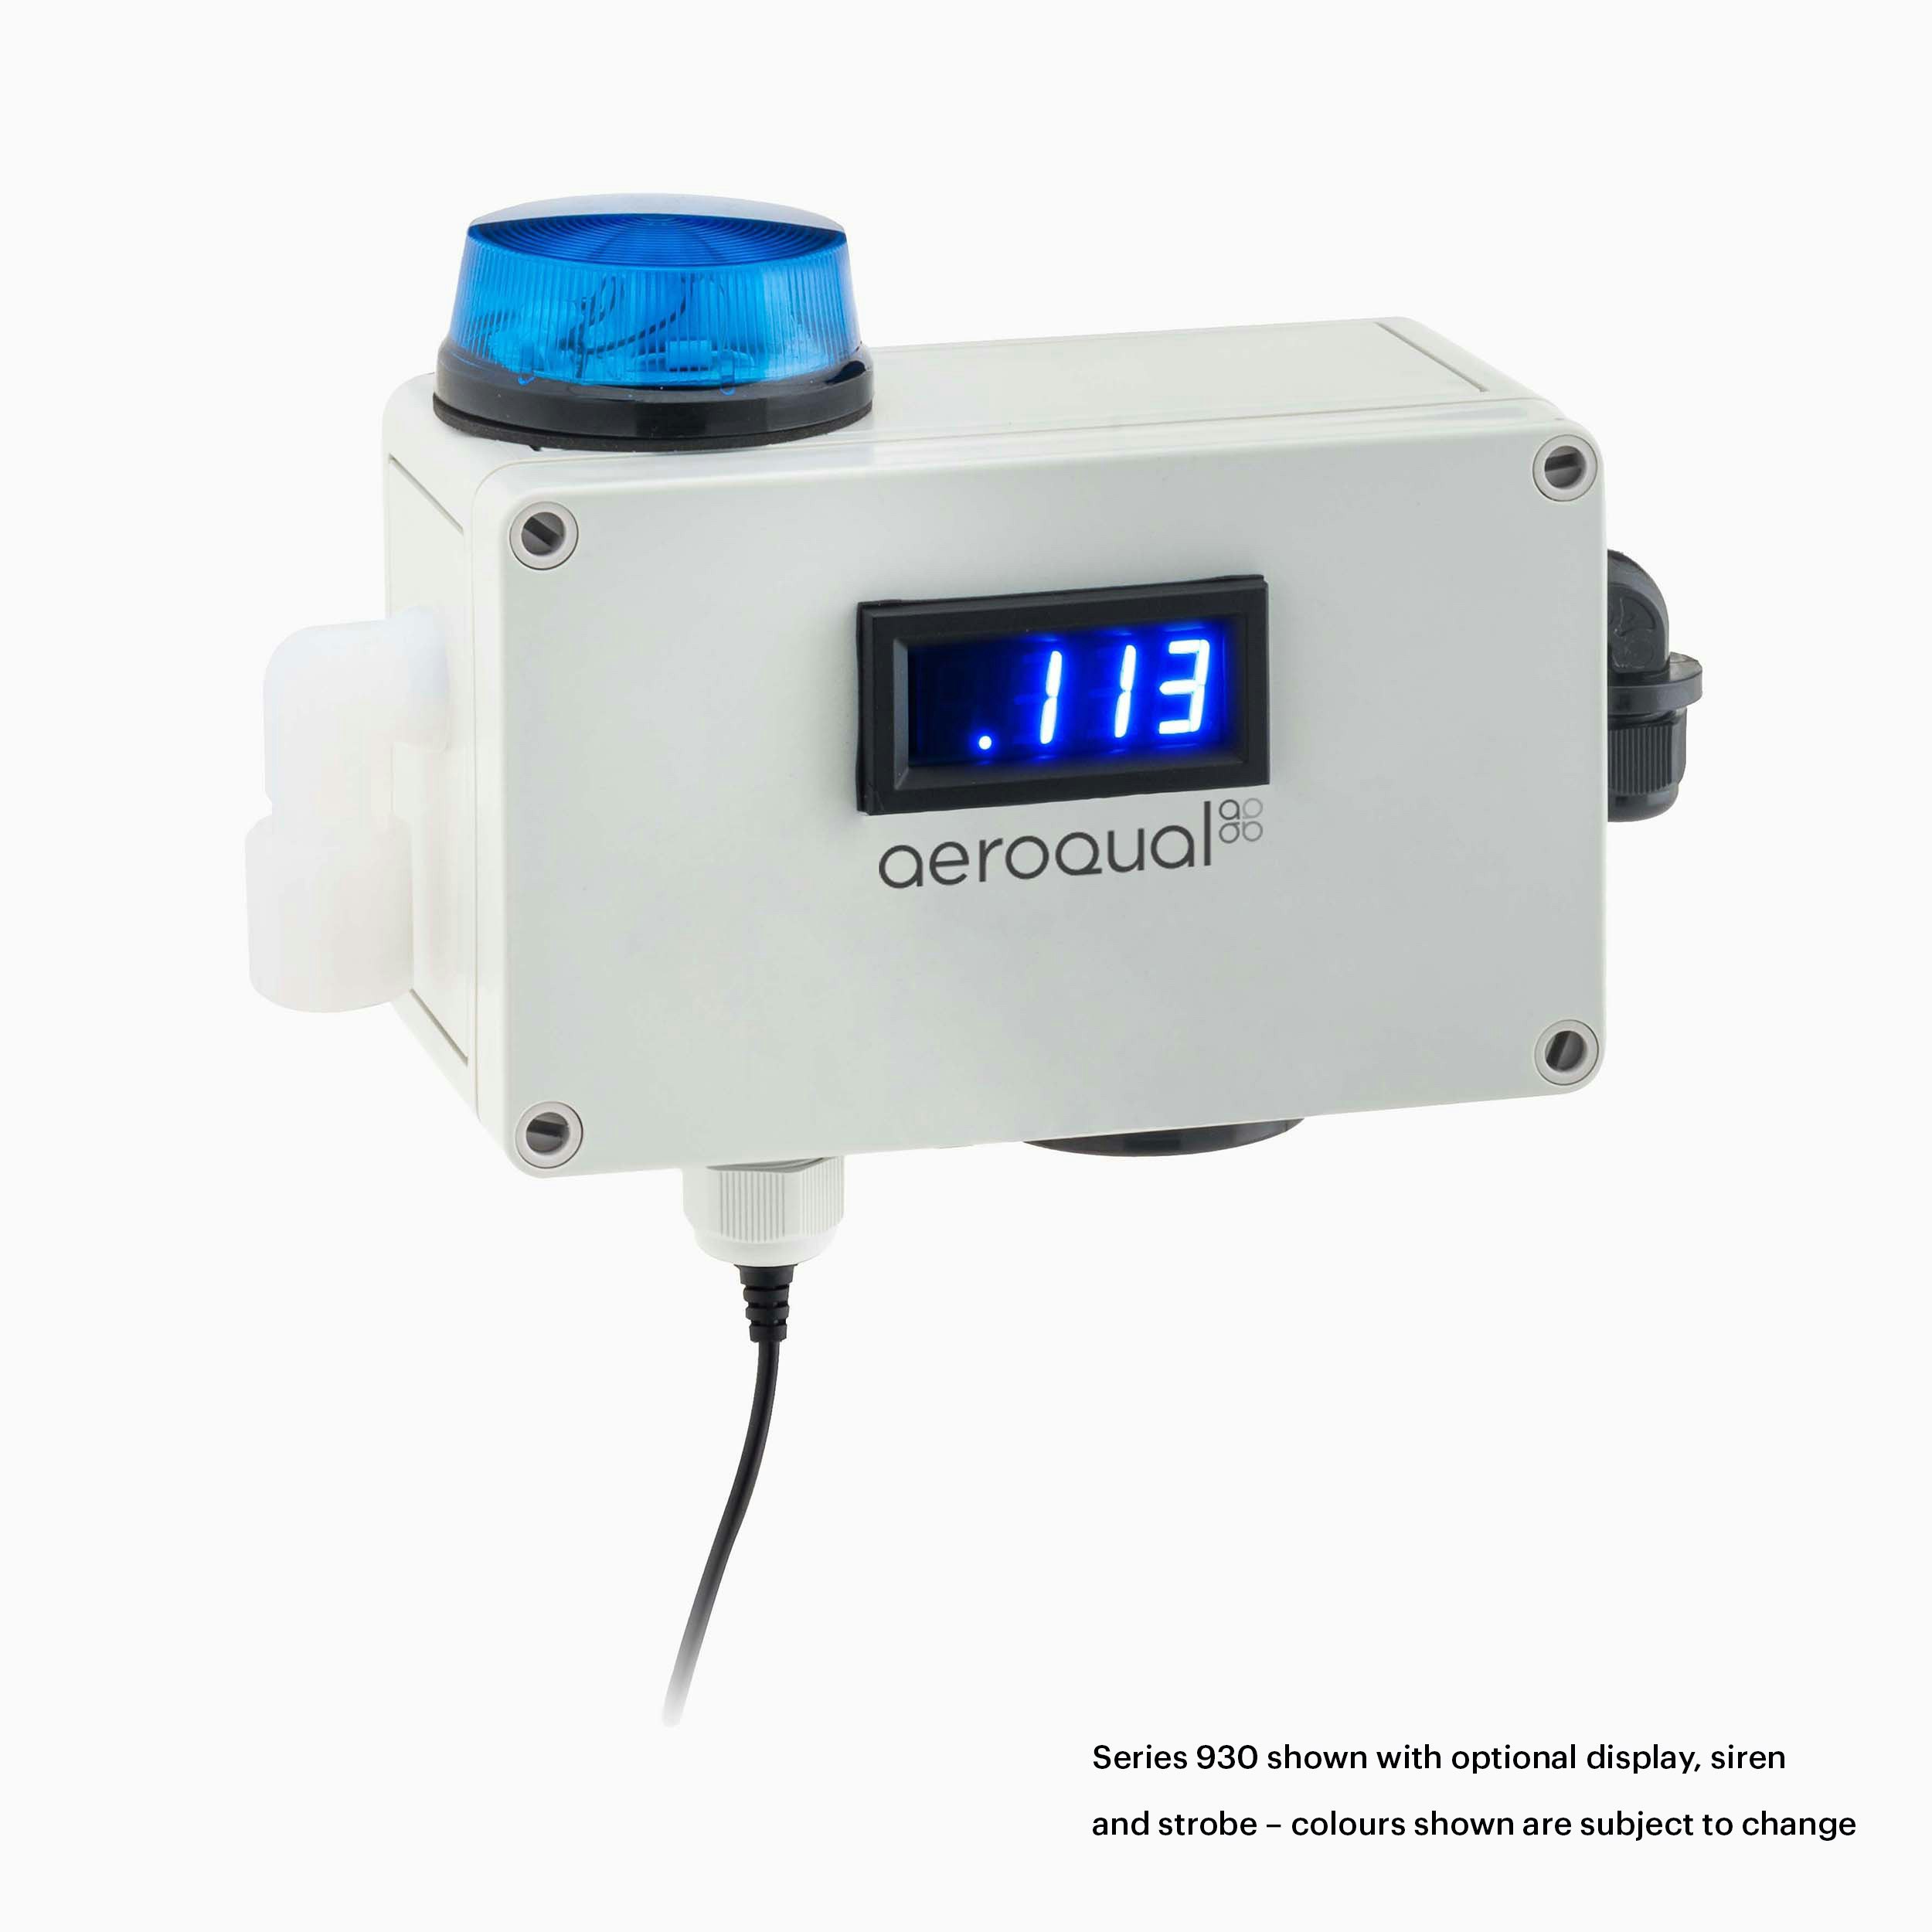 Series 930 Fixed Indoor Air Quality Monitor